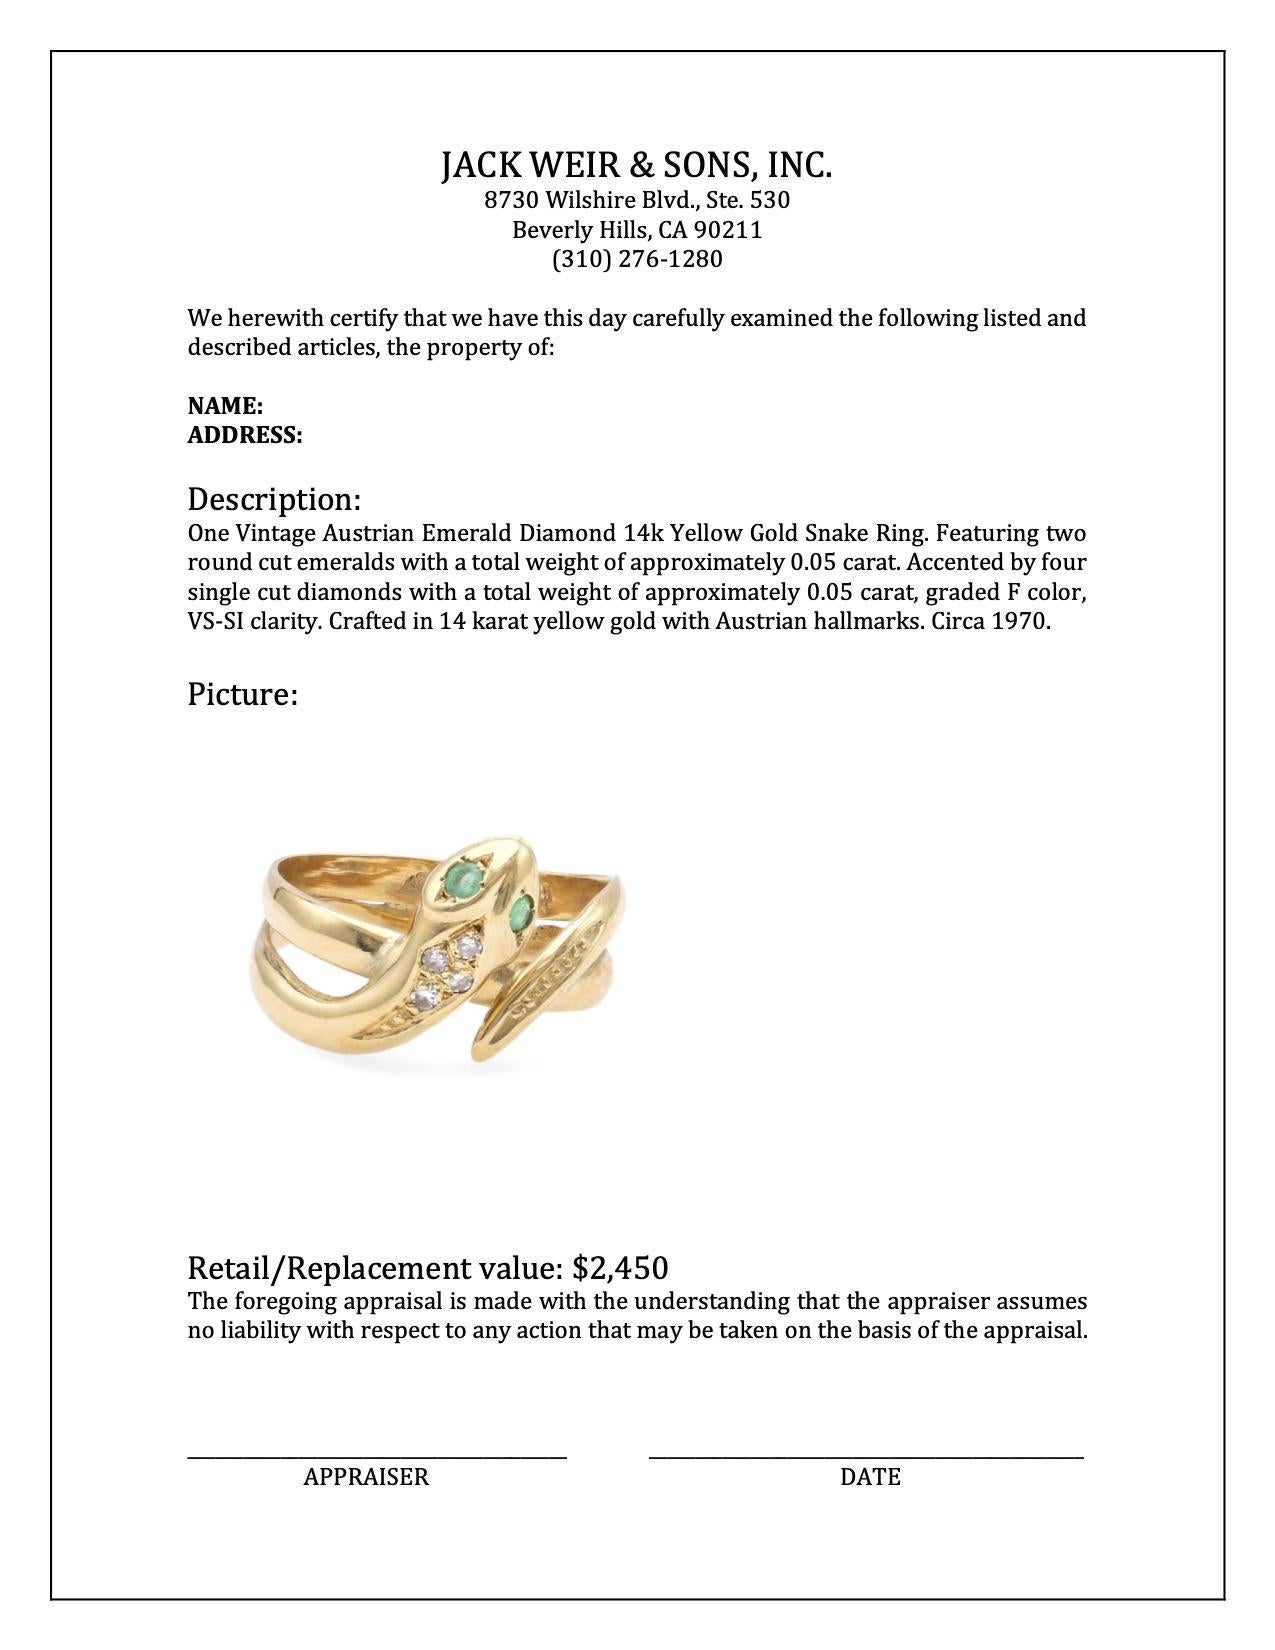 One Vintage Austrian Emerald Diamond 14k Yellow Gold Snake Ring. In Excellent Condition For Sale In Beverly Hills, CA